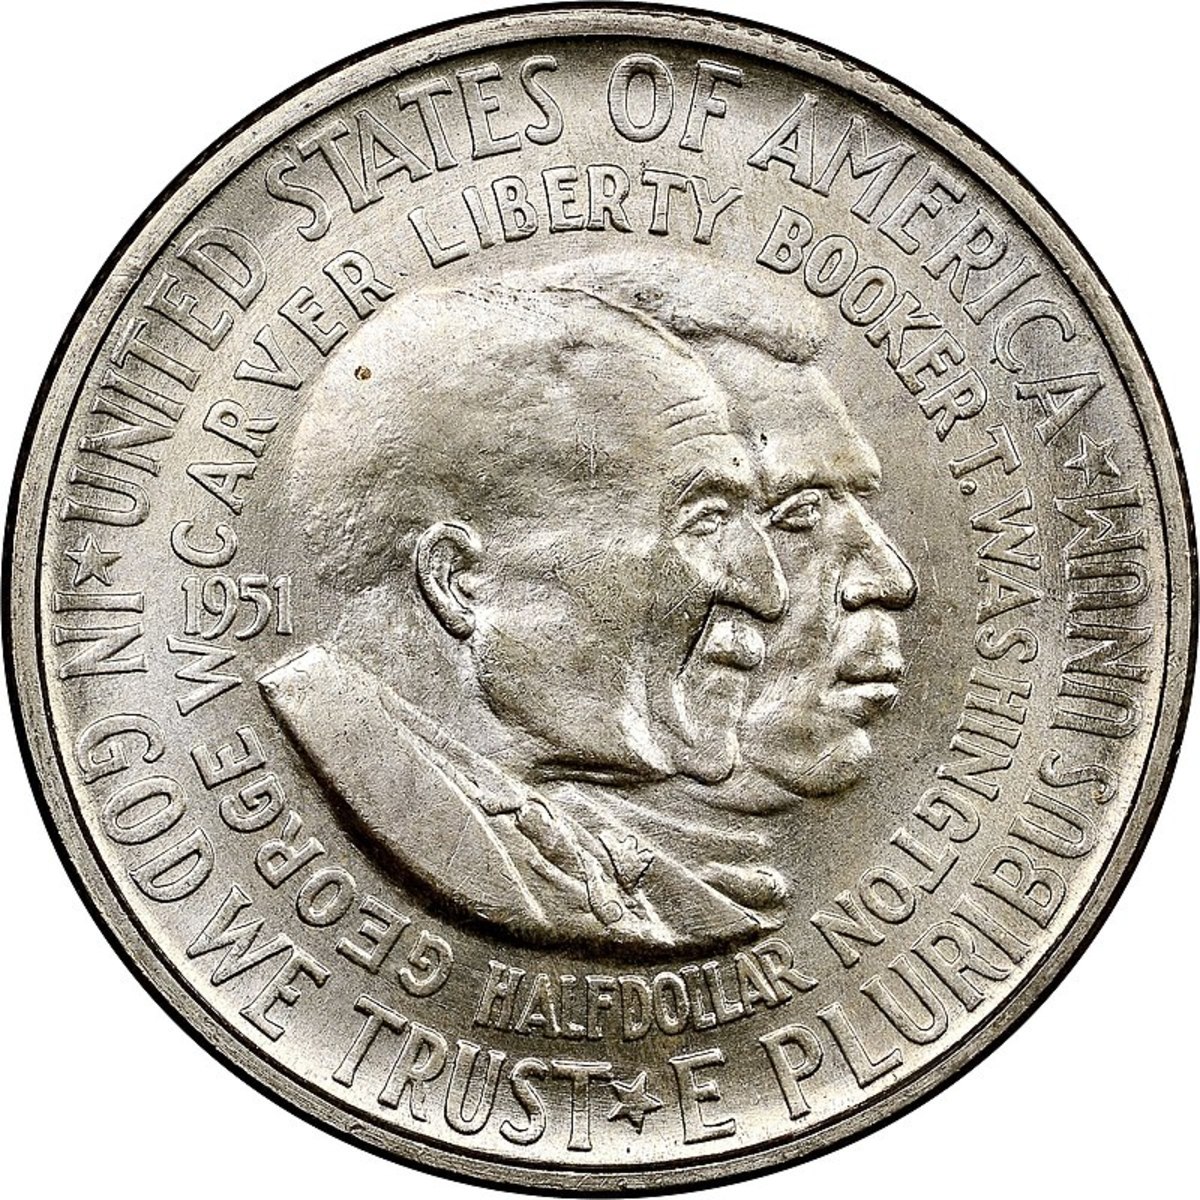 The George Washington Carver-Booker T. Washington Half Dollar depicts side-portraits of George Washington Carver and Booker T. Washington and the reverse shows a simple outline map of the United States. The coin was issued from 1951 to 1954.